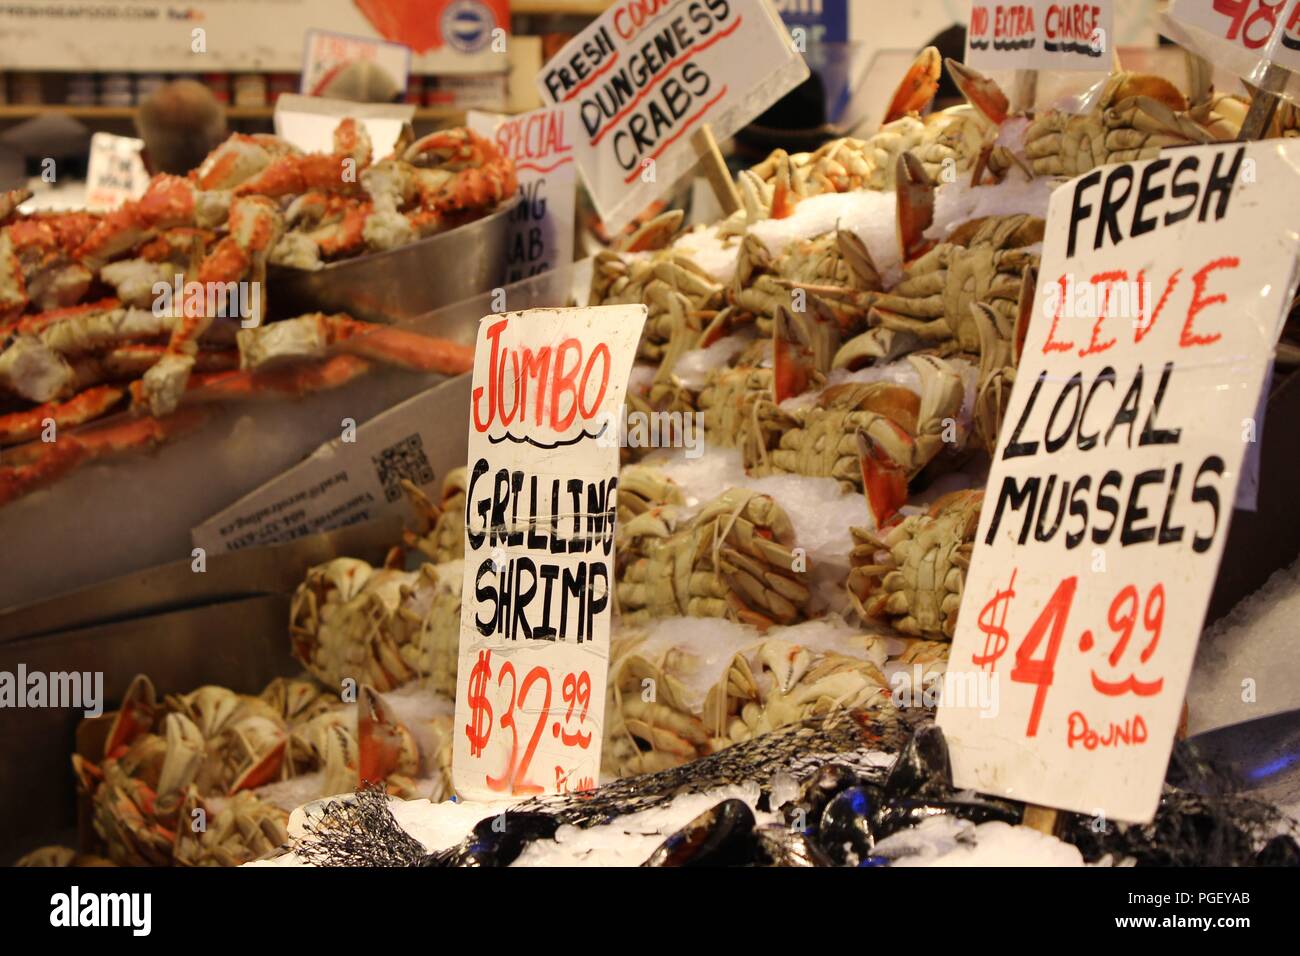 Meeresfrüchte angezeigt bei Pike Place Fish Co. am Pike Place Market in Seattle, Washington, USA Stockfoto